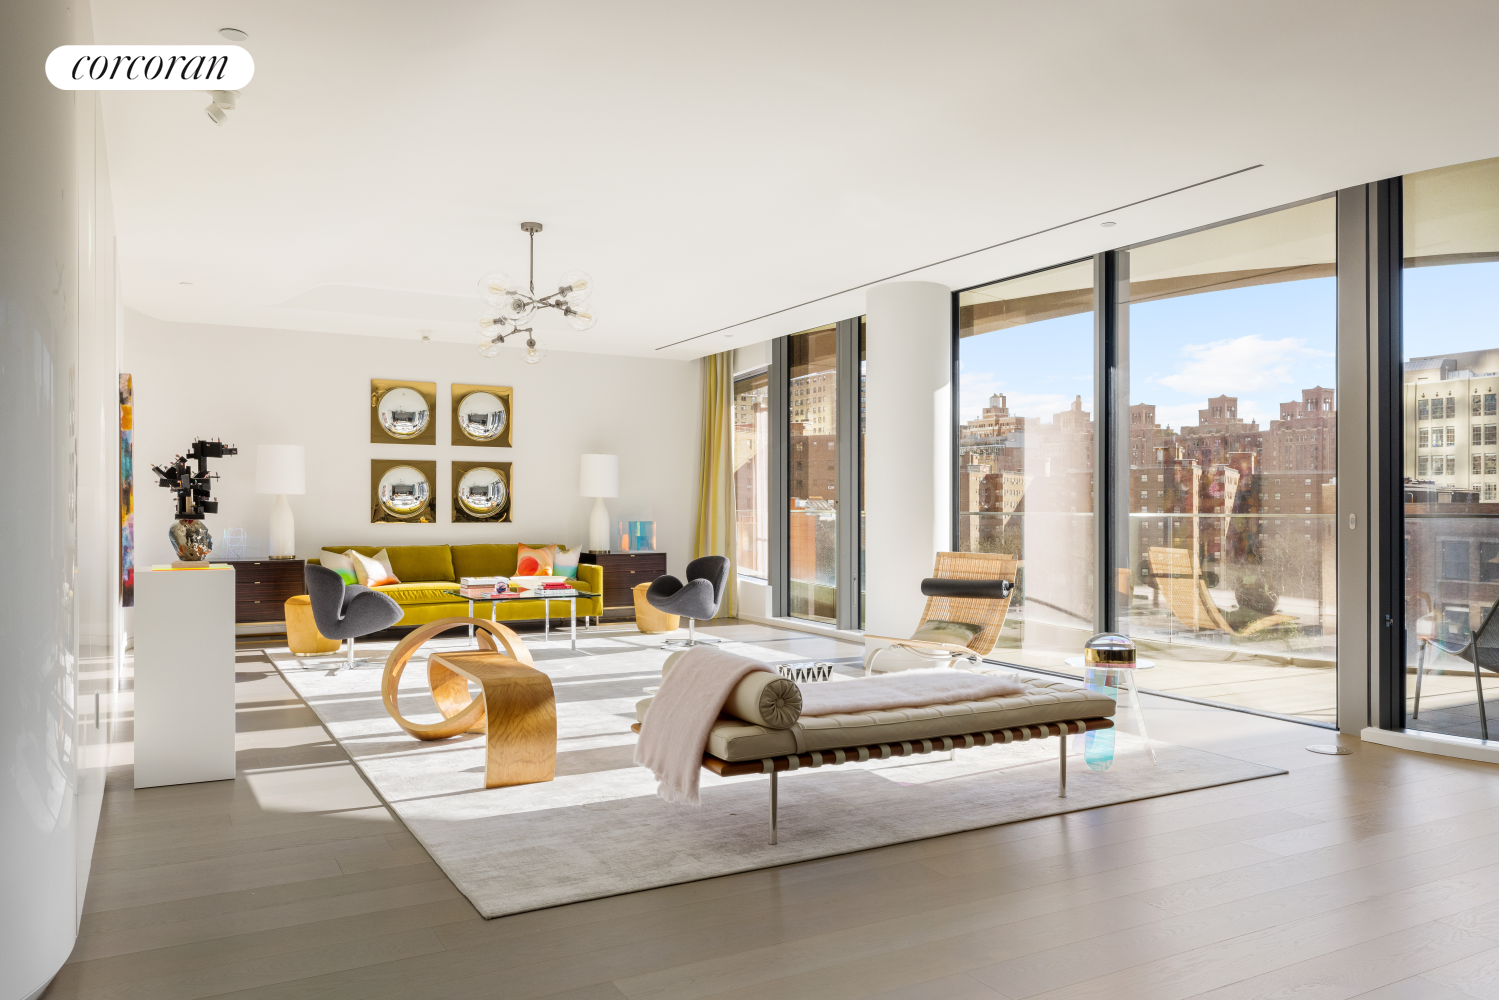 520 West 28th Street 27, Chelsea, Downtown, NYC - 4 Bedrooms  
4.5 Bathrooms  
10 Rooms - 